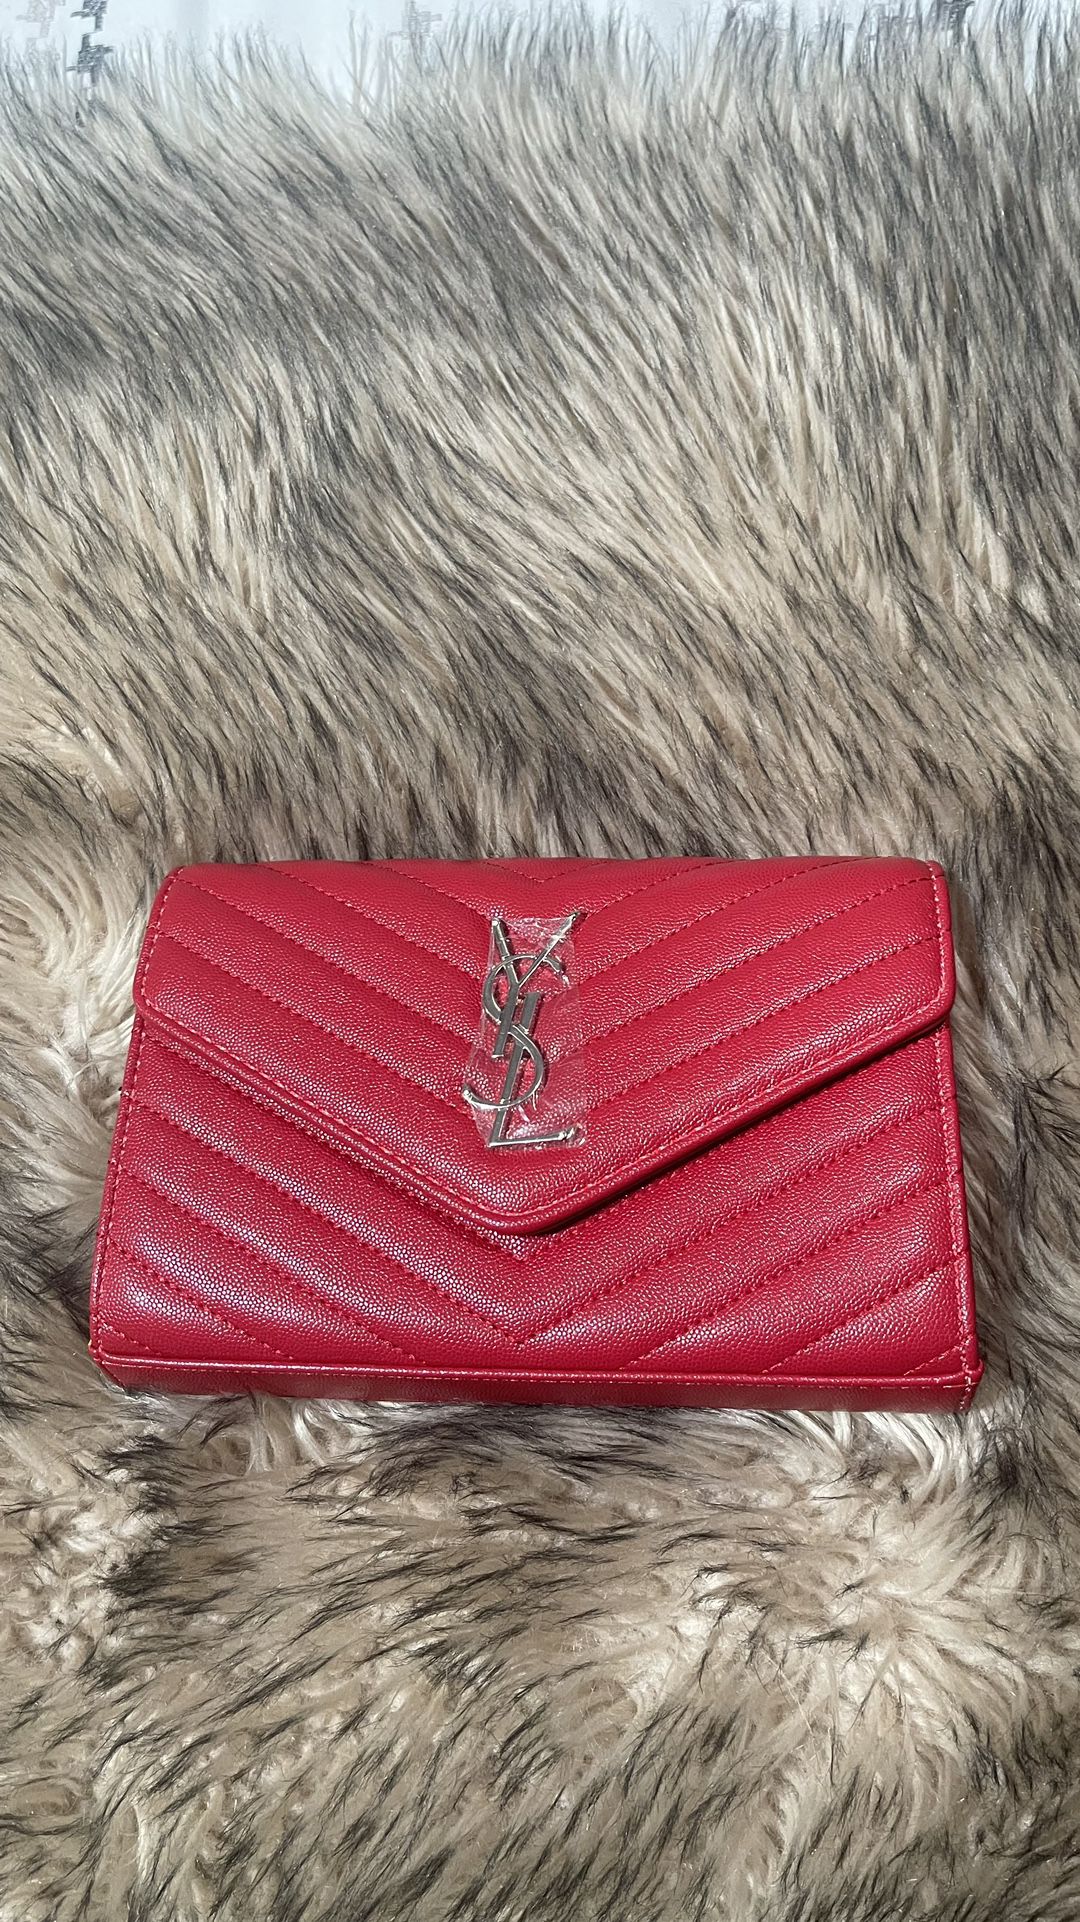 authorized dealers Saint Ysl Handbags Bag !! for for Sale in in Yves ...